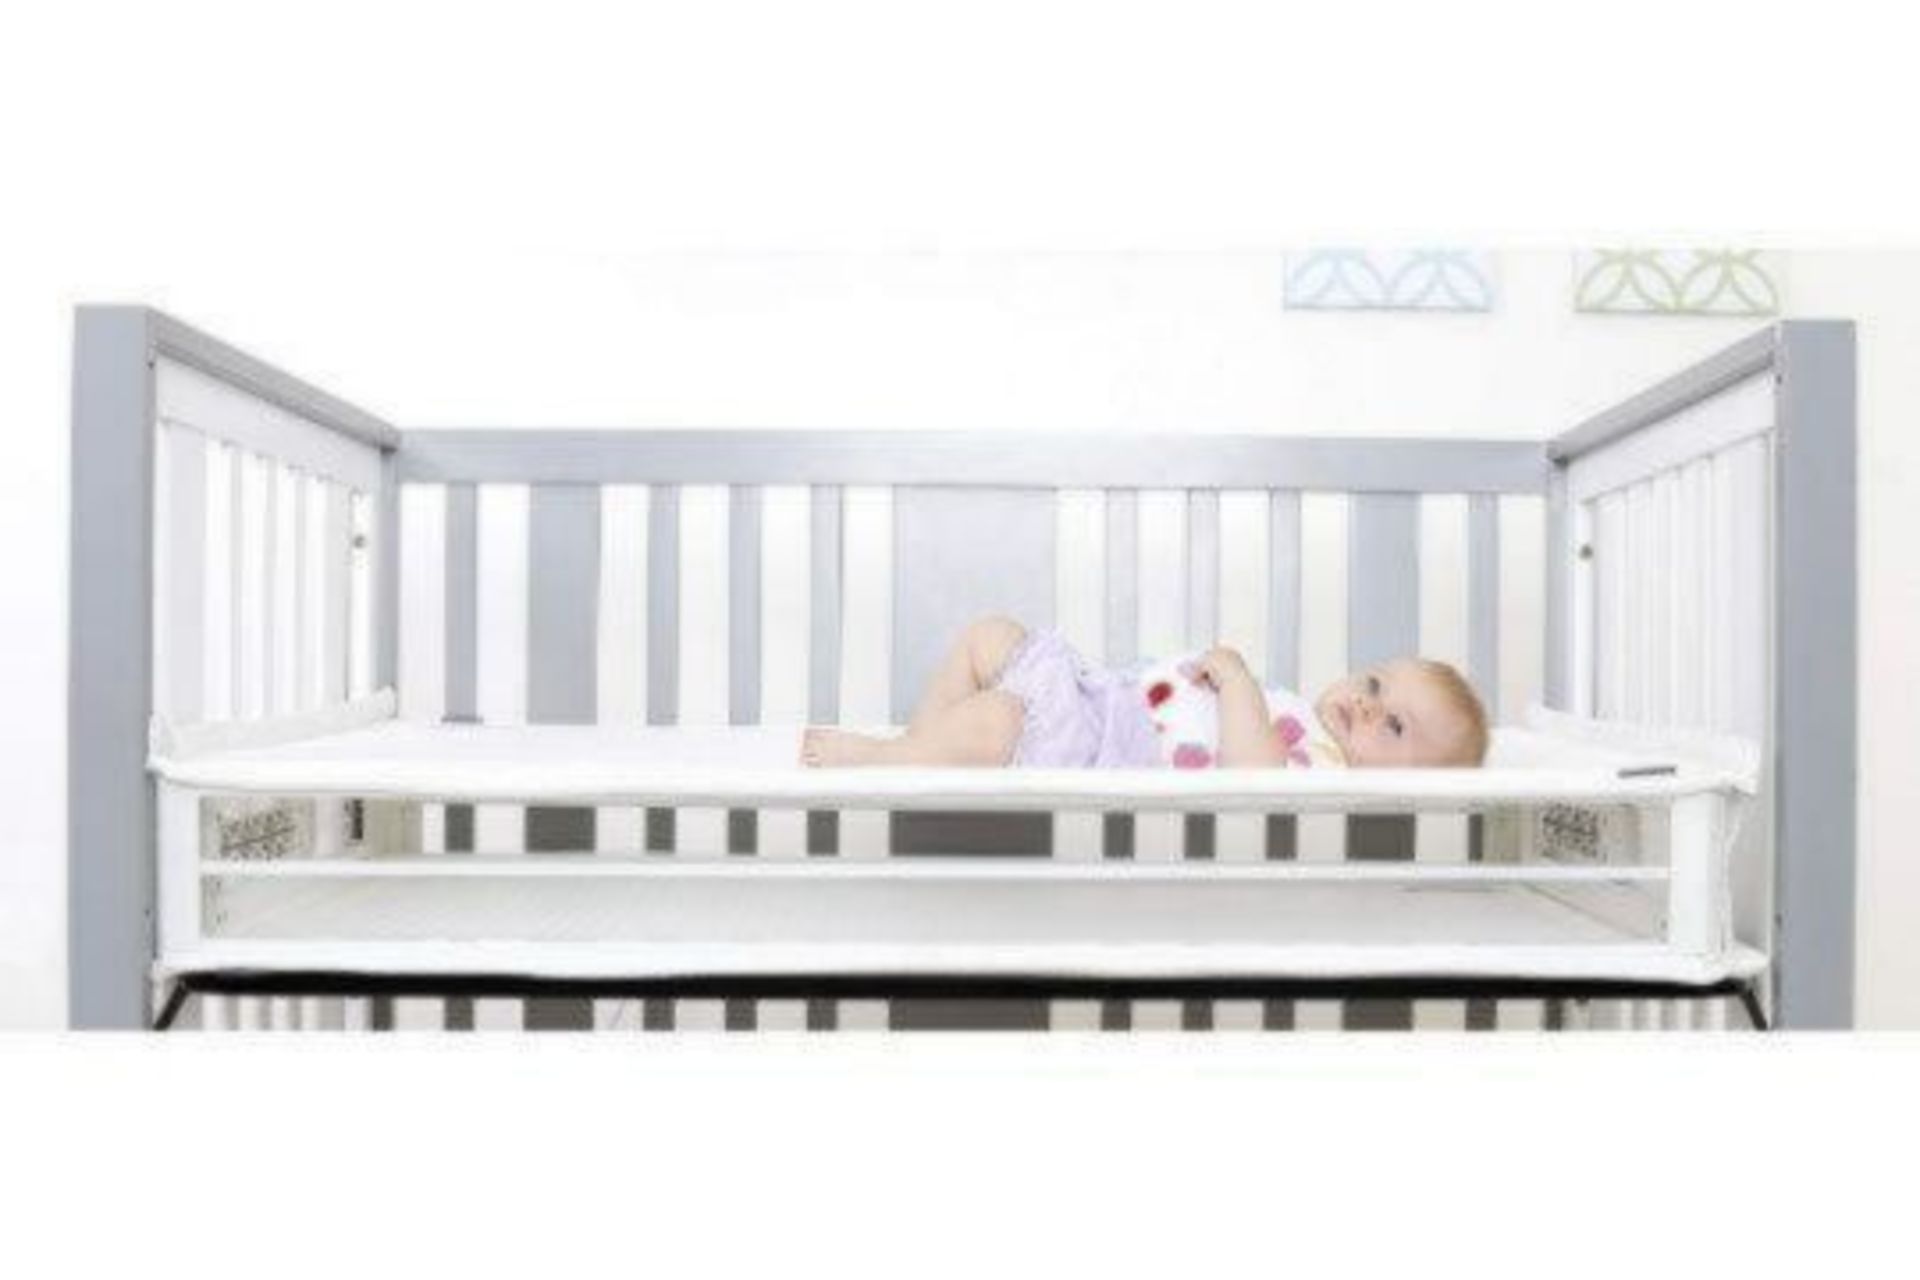 4 x Brand New Boxed - Baby Trend Respiro Cot Mattress Breathable mesh and Open Air Sides. RRP £169.